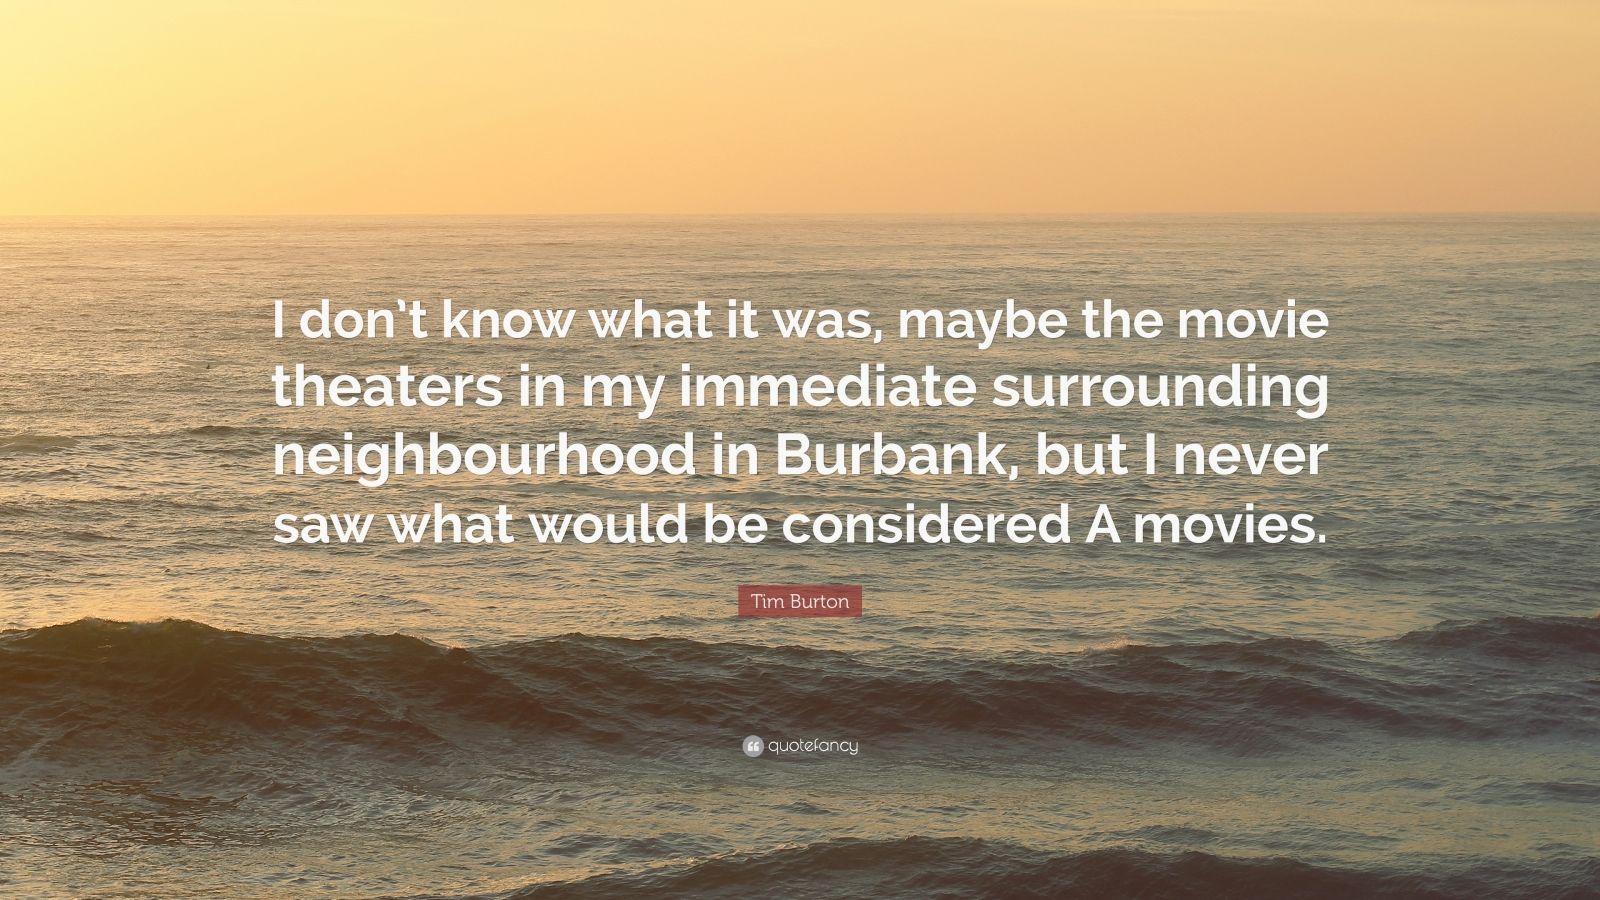 Tim Burton Quote: "I don't know what it was, maybe the movie theaters in my immediate ...